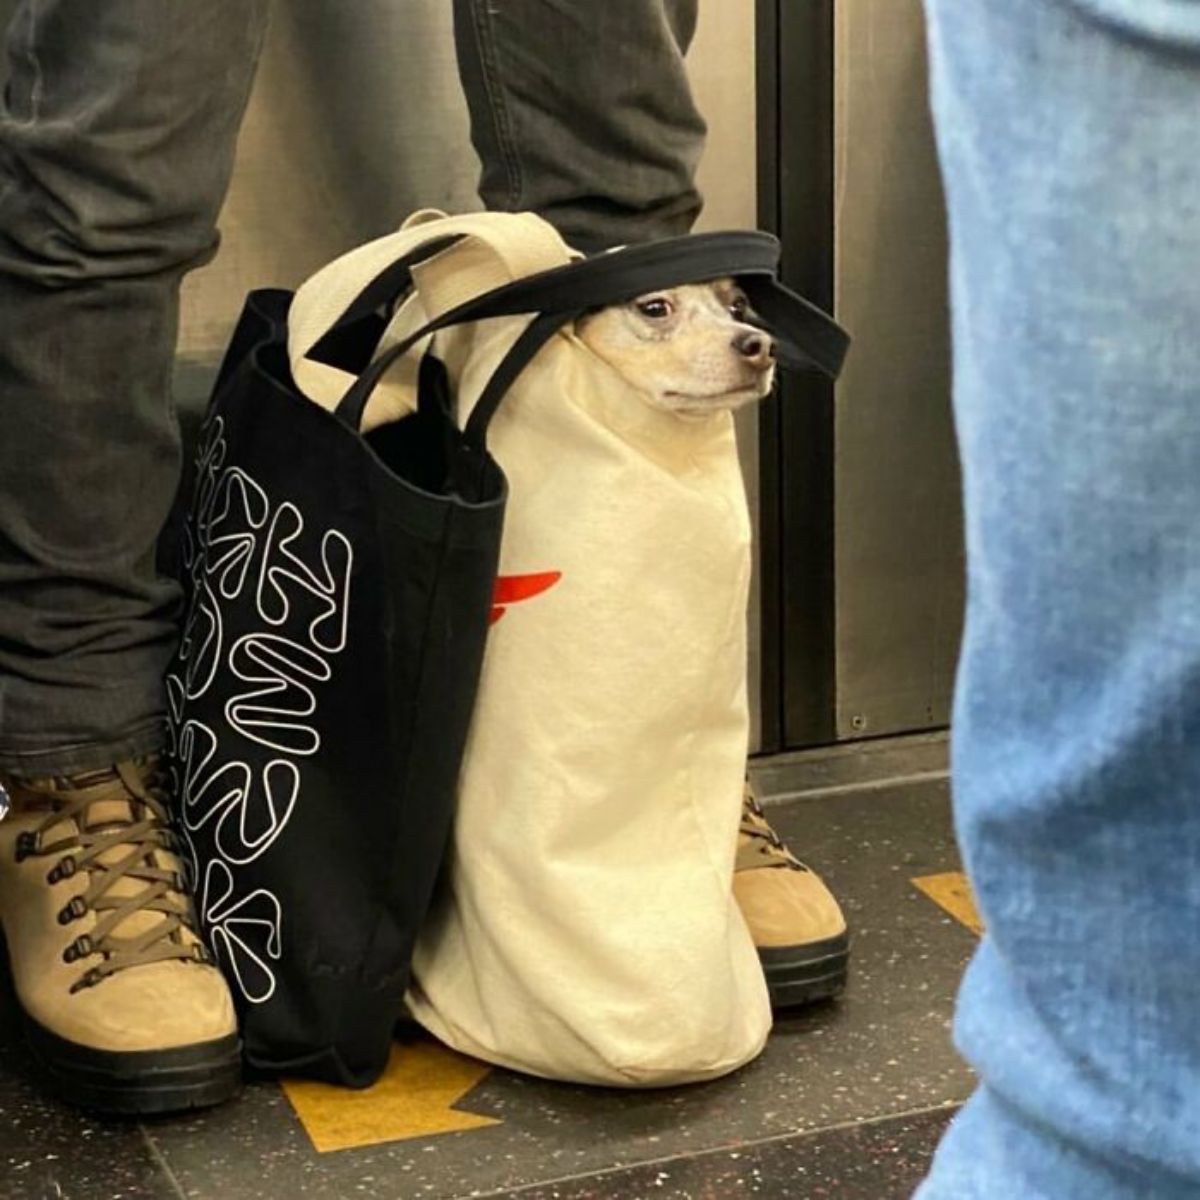 white dog in a white cloth bag on the floor with its head sticking out next to a black cloth bag kept between someone's feet